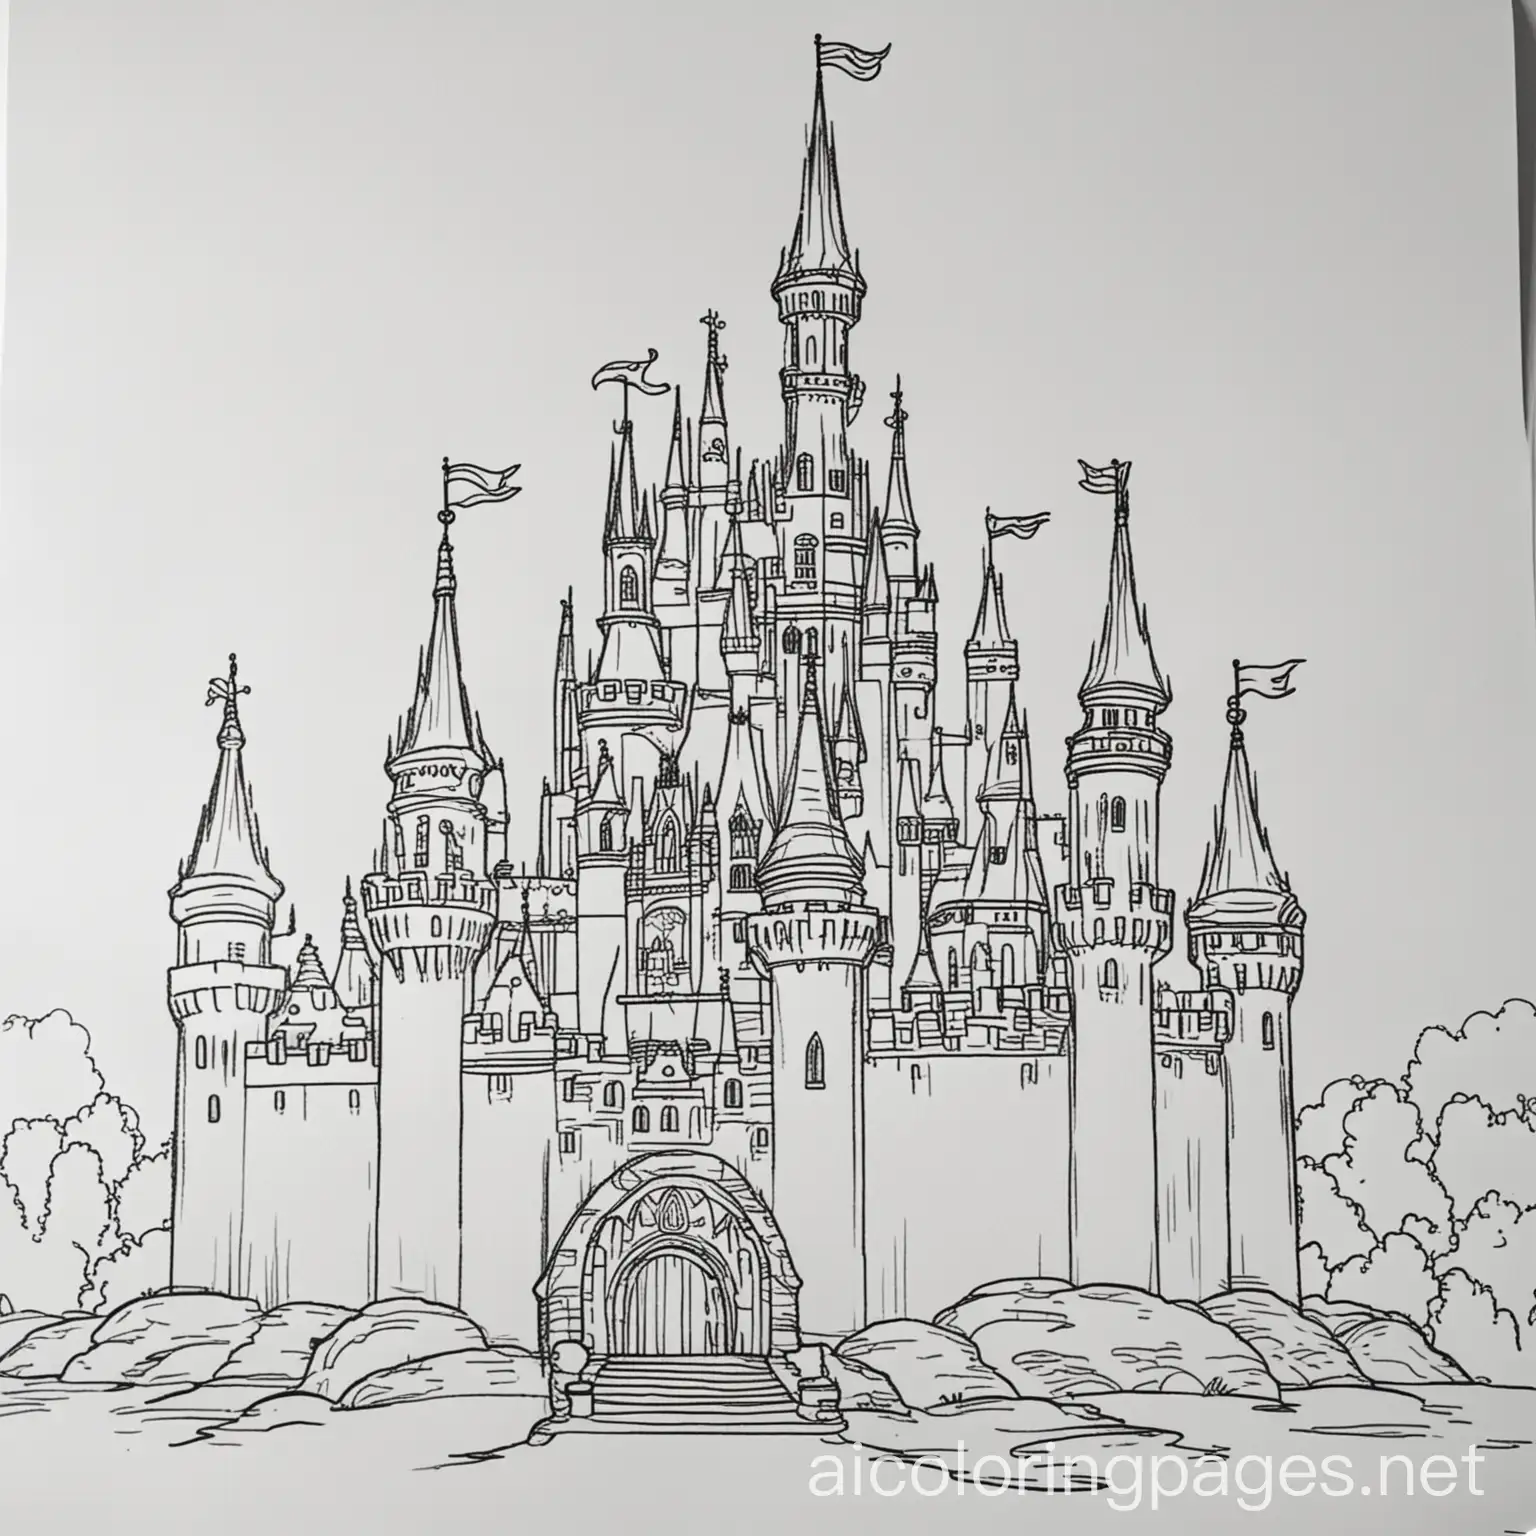 disney castle , Coloring Page, black and white, line art, white background, Simplicity, Ample White Space. The background of the coloring page is plain white to make it easy for young children to color within the lines. The outlines of all the subjects are easy to distinguish, making it simple for kids to color without too much difficulty